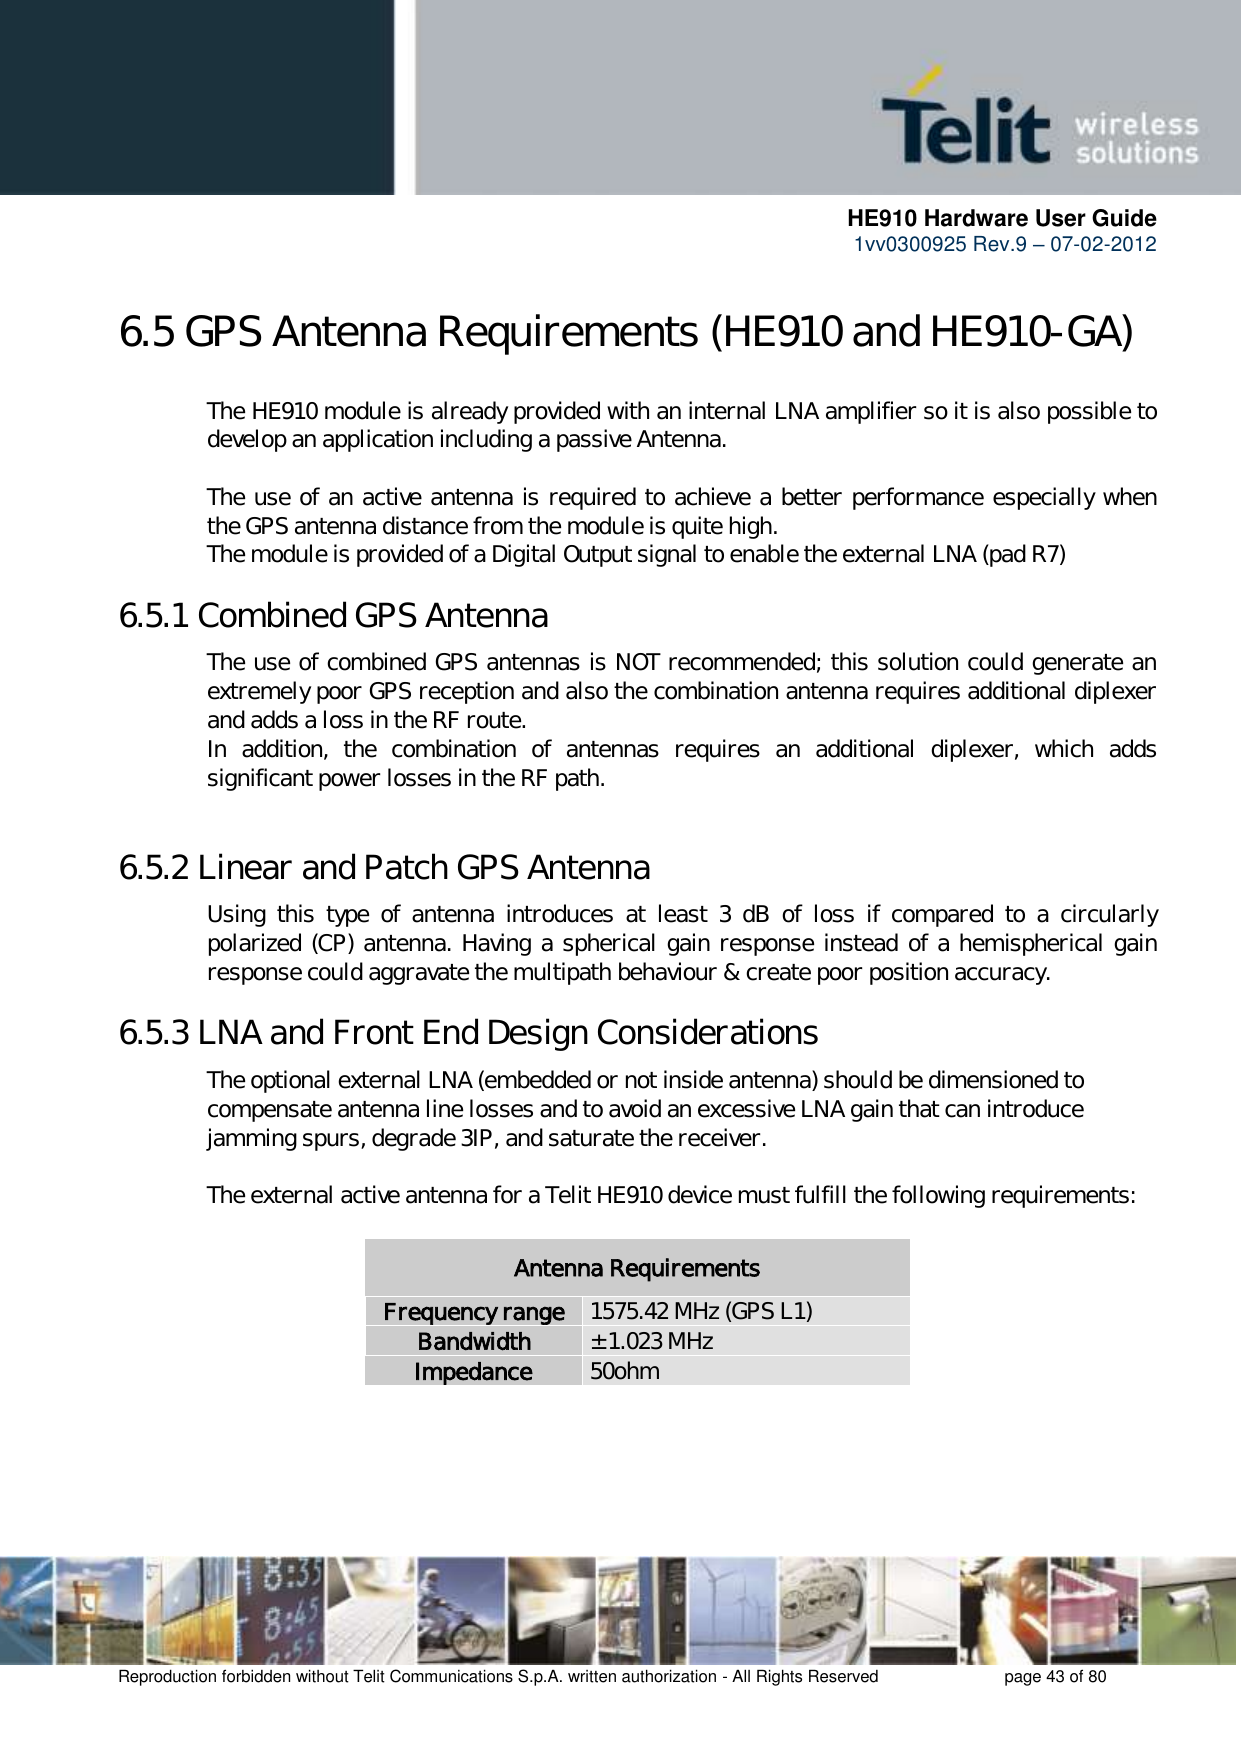      HE910 Hardware User Guide 1vv0300925 Rev.9 – 07-02-2012    Reproduction forbidden without Telit Communications S.p.A. written authorization - All Rights Reserved    page 43 of 80  6.5 GPS Antenna Requirements (HE910 and HE910-GA)   The HE910 module is already provided with an internal LNA amplifier so it is also possible to   develop an application including a passive Antenna.      The use of an active antenna is required to achieve a better performance especially when   the GPS antenna distance from the module is quite high.    The module is provided of a Digital Output signal to enable the external LNA (pad R7) 6.5.1 Combined GPS Antenna   The use of combined GPS antennas is NOT recommended; this solution could generate an   extremely poor GPS reception and also the combination antenna requires additional diplexer   and adds a loss in the RF route. In  addition,  the  combination  of  antennas  requires  an  additional  diplexer,  which  adds significant power losses in the RF path.     6.5.2 Linear and Patch GPS Antenna   Using  this  type  of  antenna  introduces  at  least  3  dB  of  loss  if  compared  to  a  circularly   polarized (CP) antenna. Having a spherical gain response instead of a hemispherical gain   response could aggravate the multipath behaviour &amp; create poor position accuracy. 6.5.3 LNA and Front End Design Considerations   The optional external LNA (embedded or not inside antenna) should be dimensioned to   compensate antenna line losses and to avoid an excessive LNA gain that can introduce   jamming spurs, degrade 3IP, and saturate the receiver.     The external active antenna for a Telit HE910 device must fulfill the following requirements:  Antenna Requirements Frequency range 1575.42 MHz (GPS L1) Bandwidth ± 1.023 MHz Impedance 50ohm     